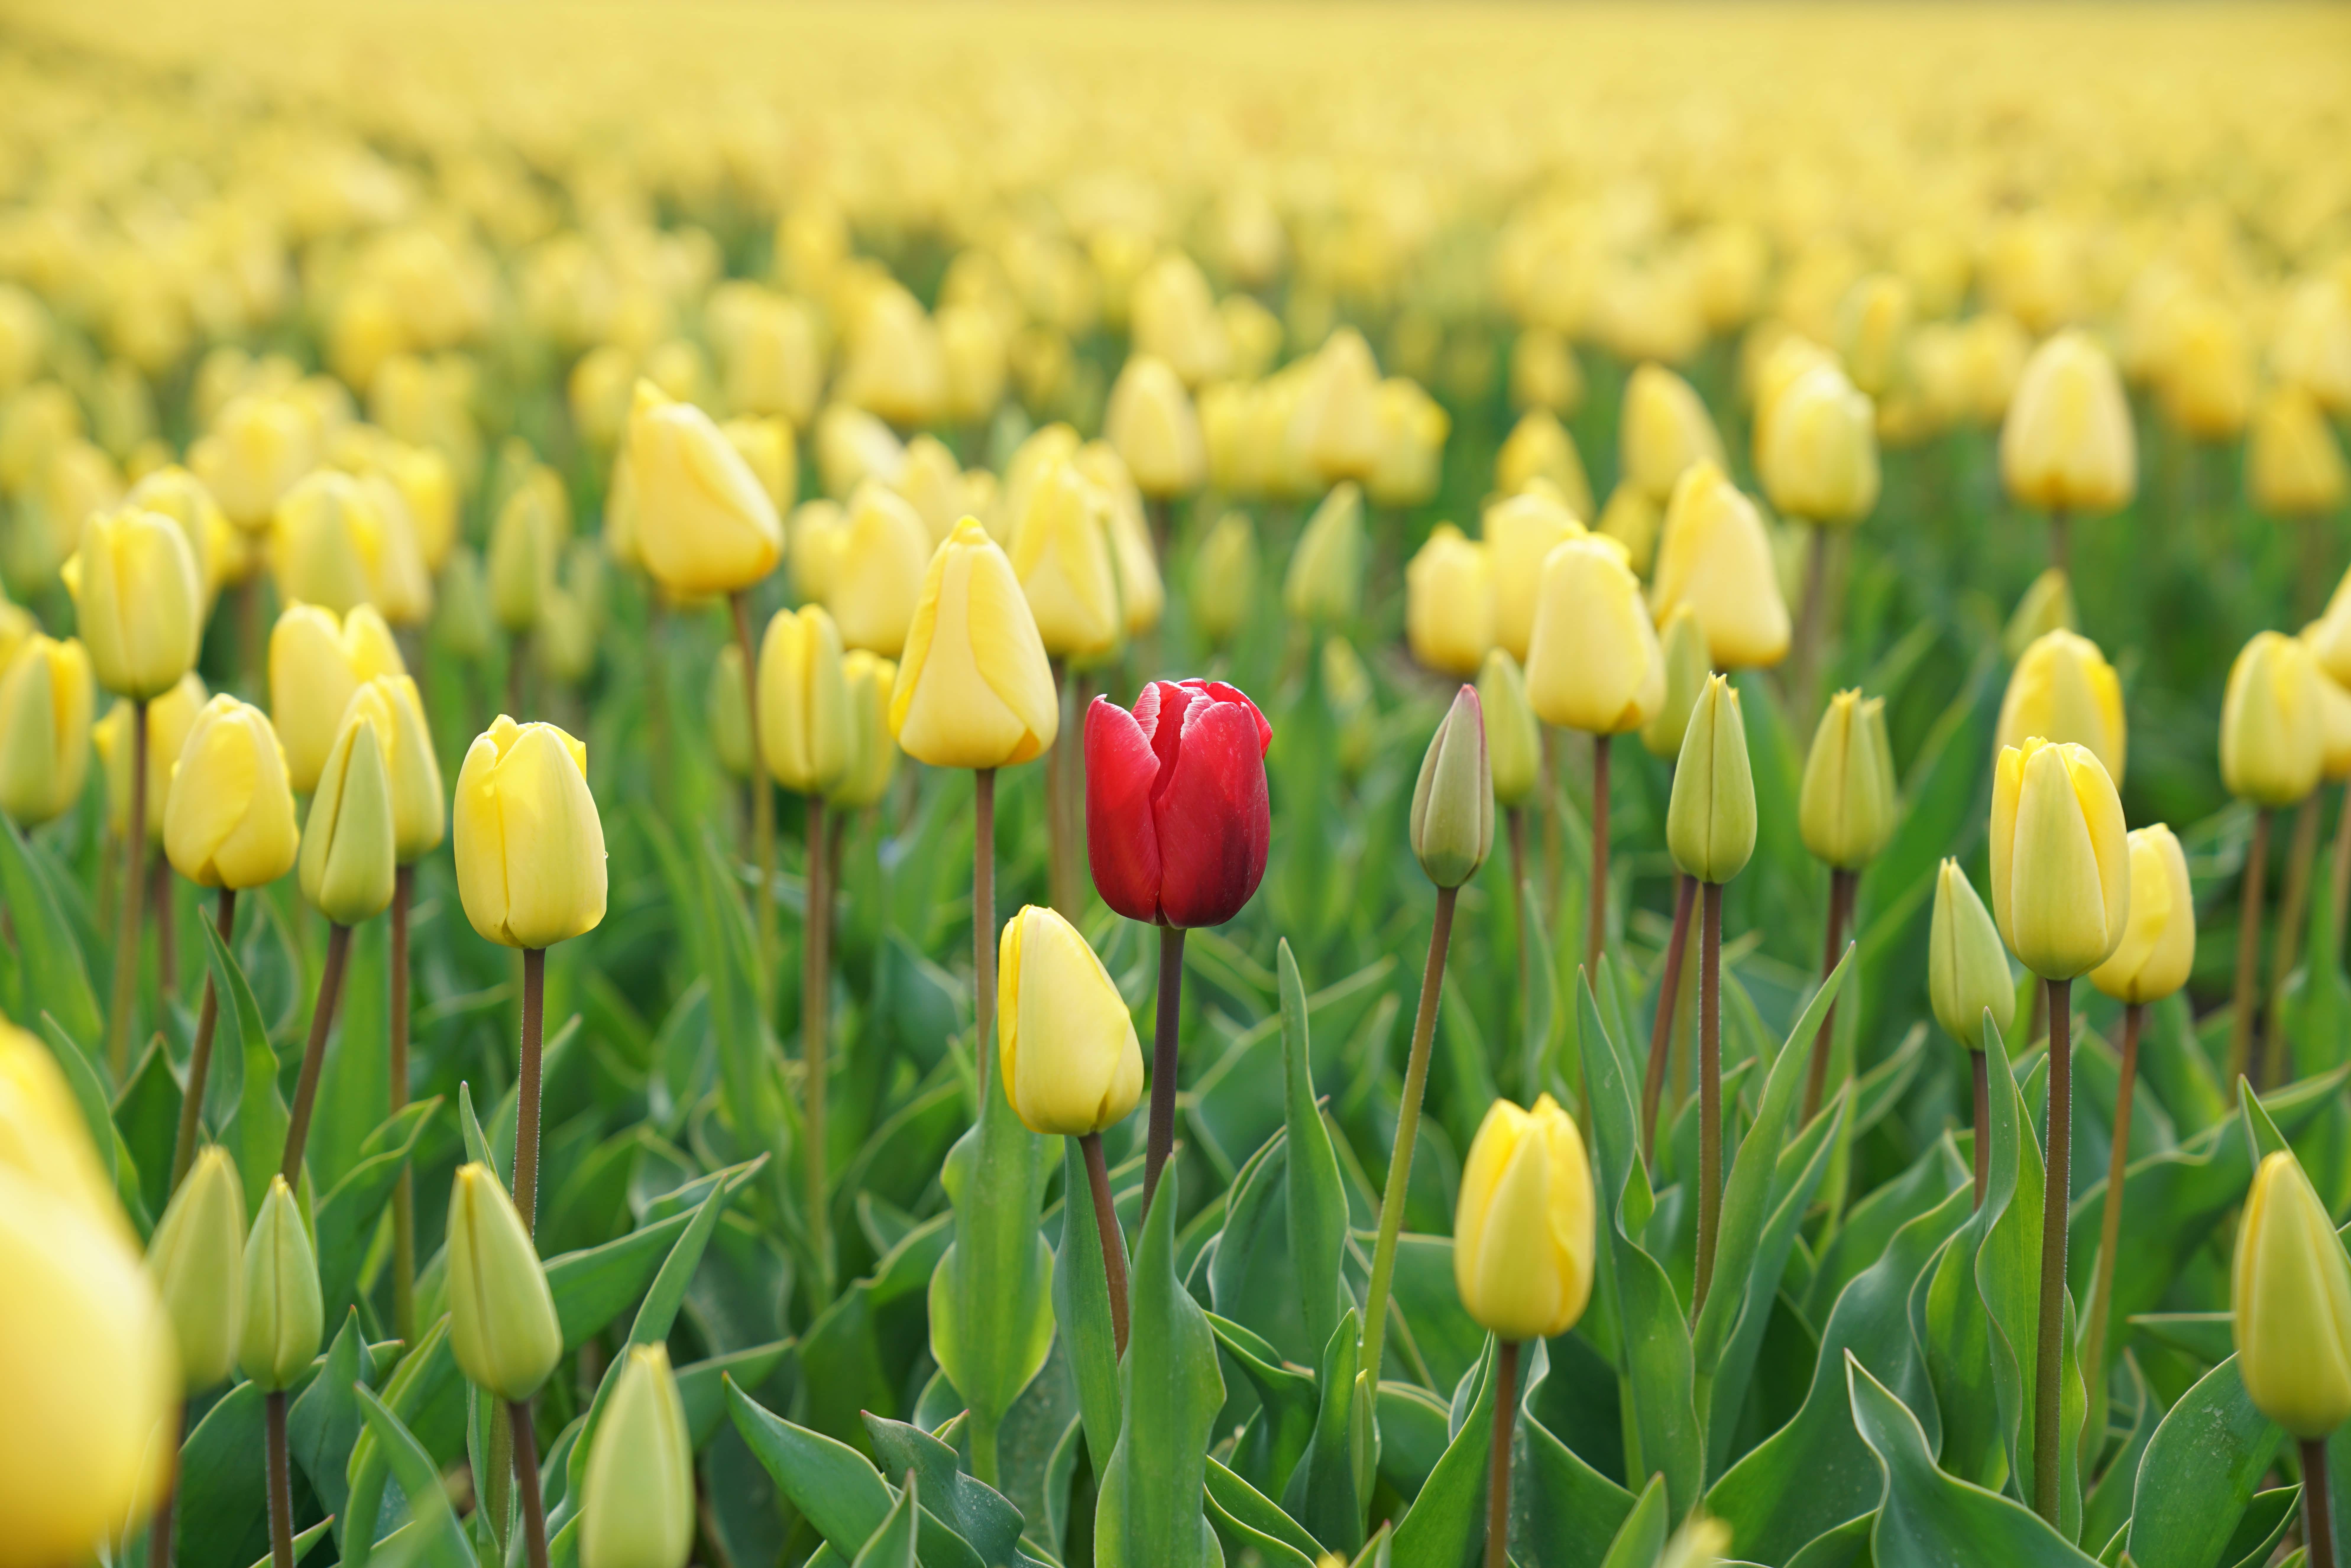 A field of yellow tulips with one red tulip in the center